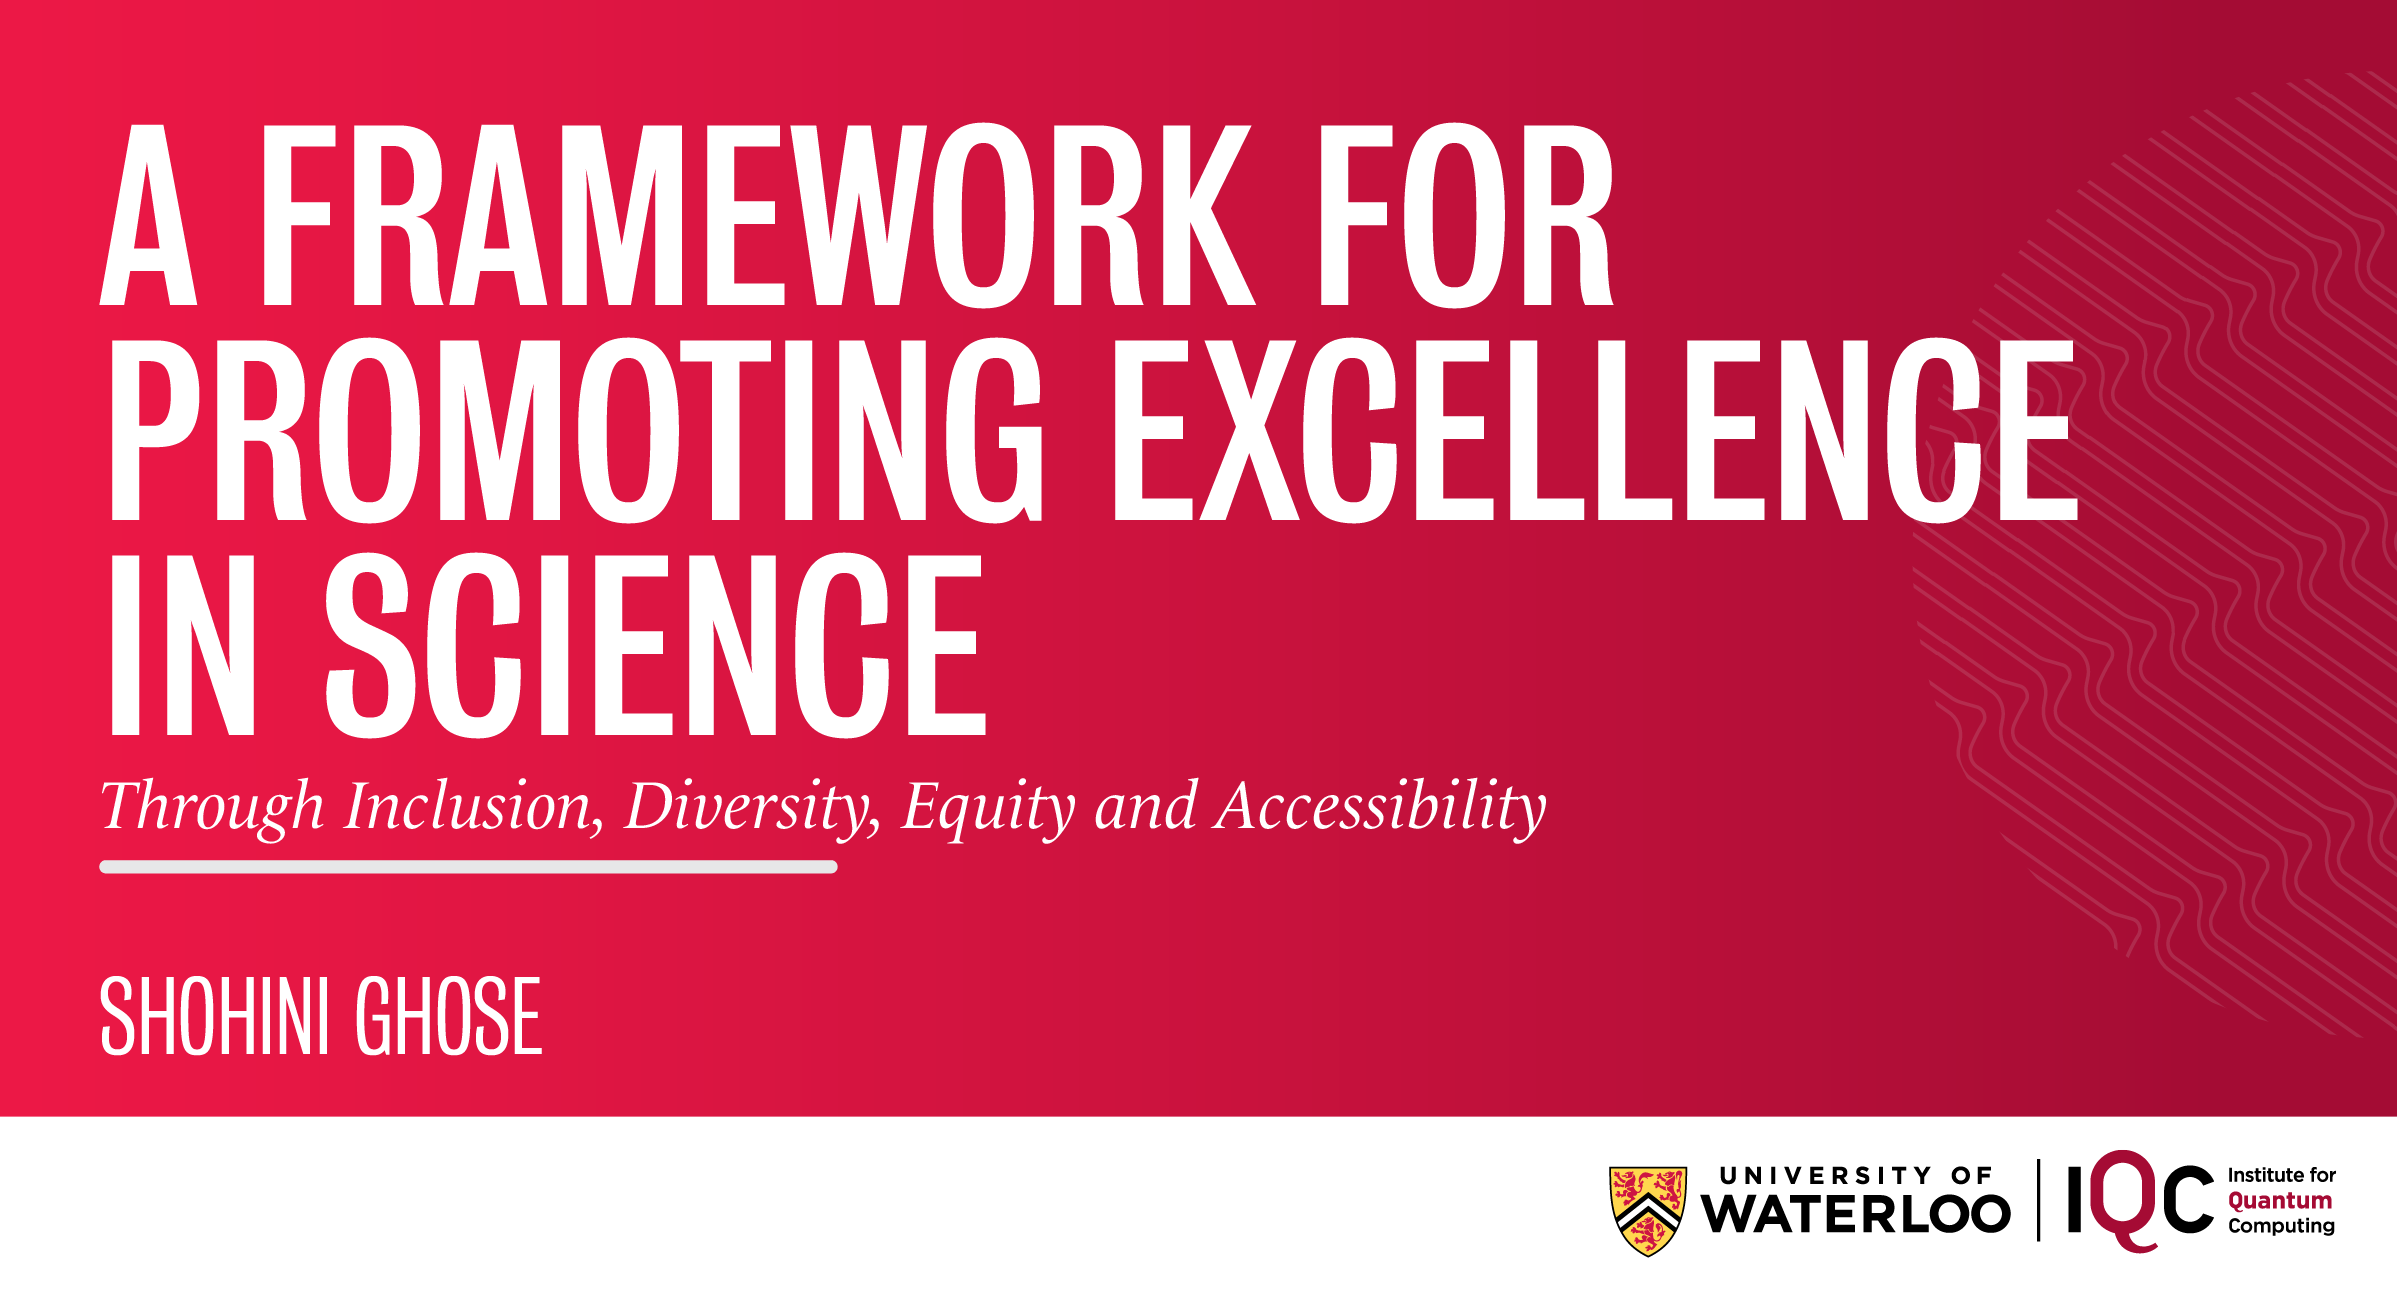 hohini Ghose – A framework for promoting excellence in science through Inclusion, Diversity, Equity and Accessibility